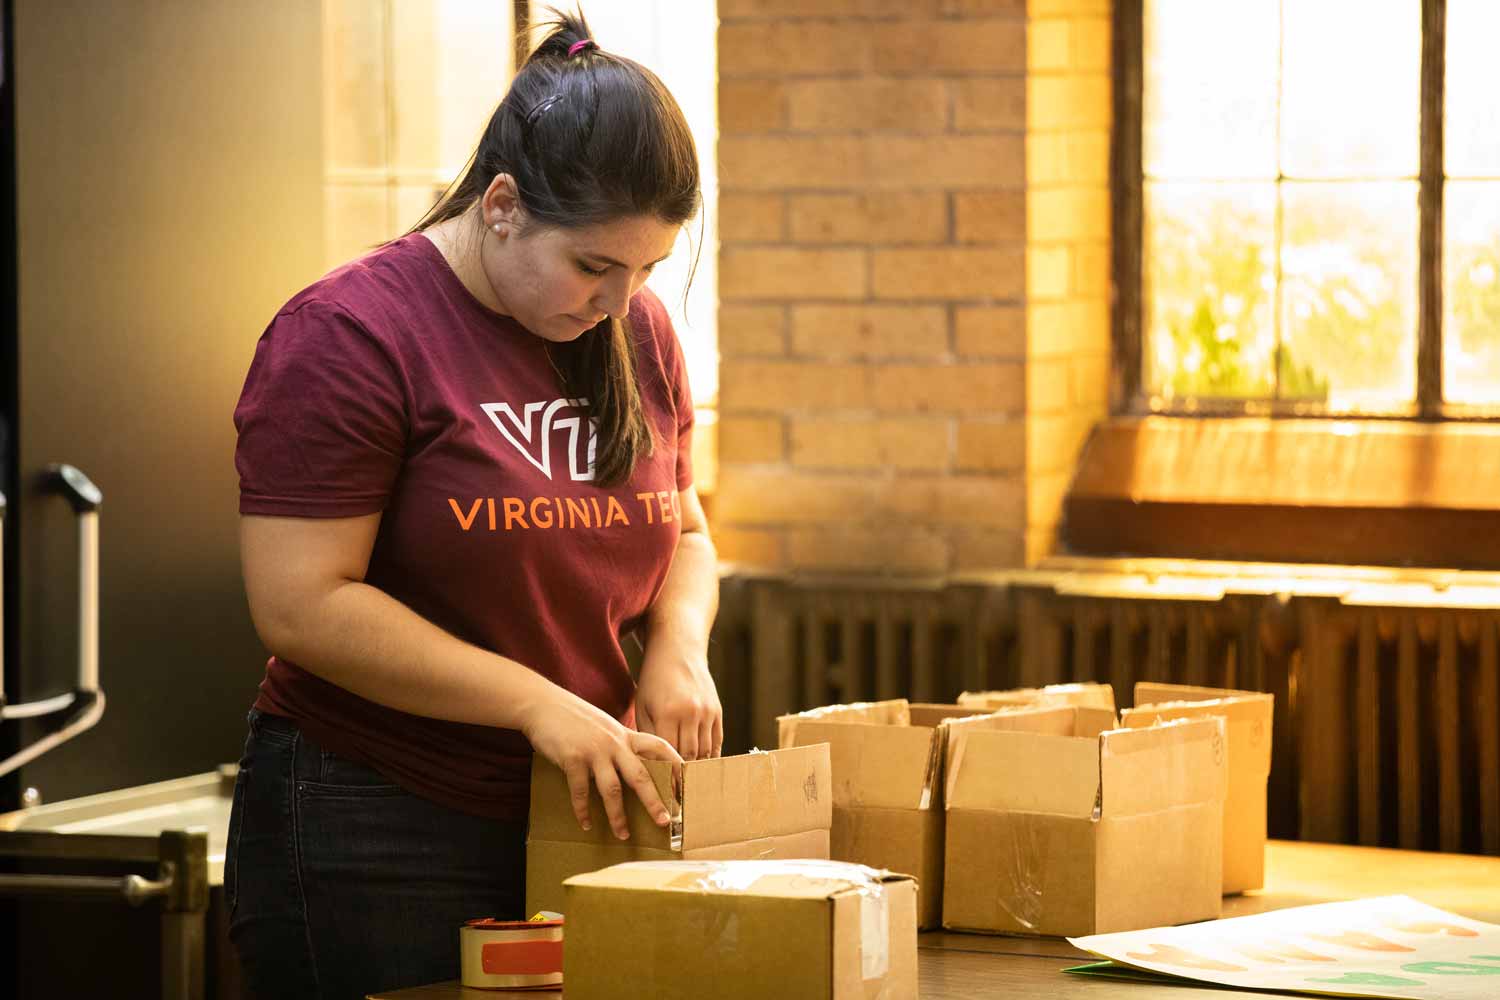 A Virginia Tech grad student prepares water sample kits in the basement of a church.